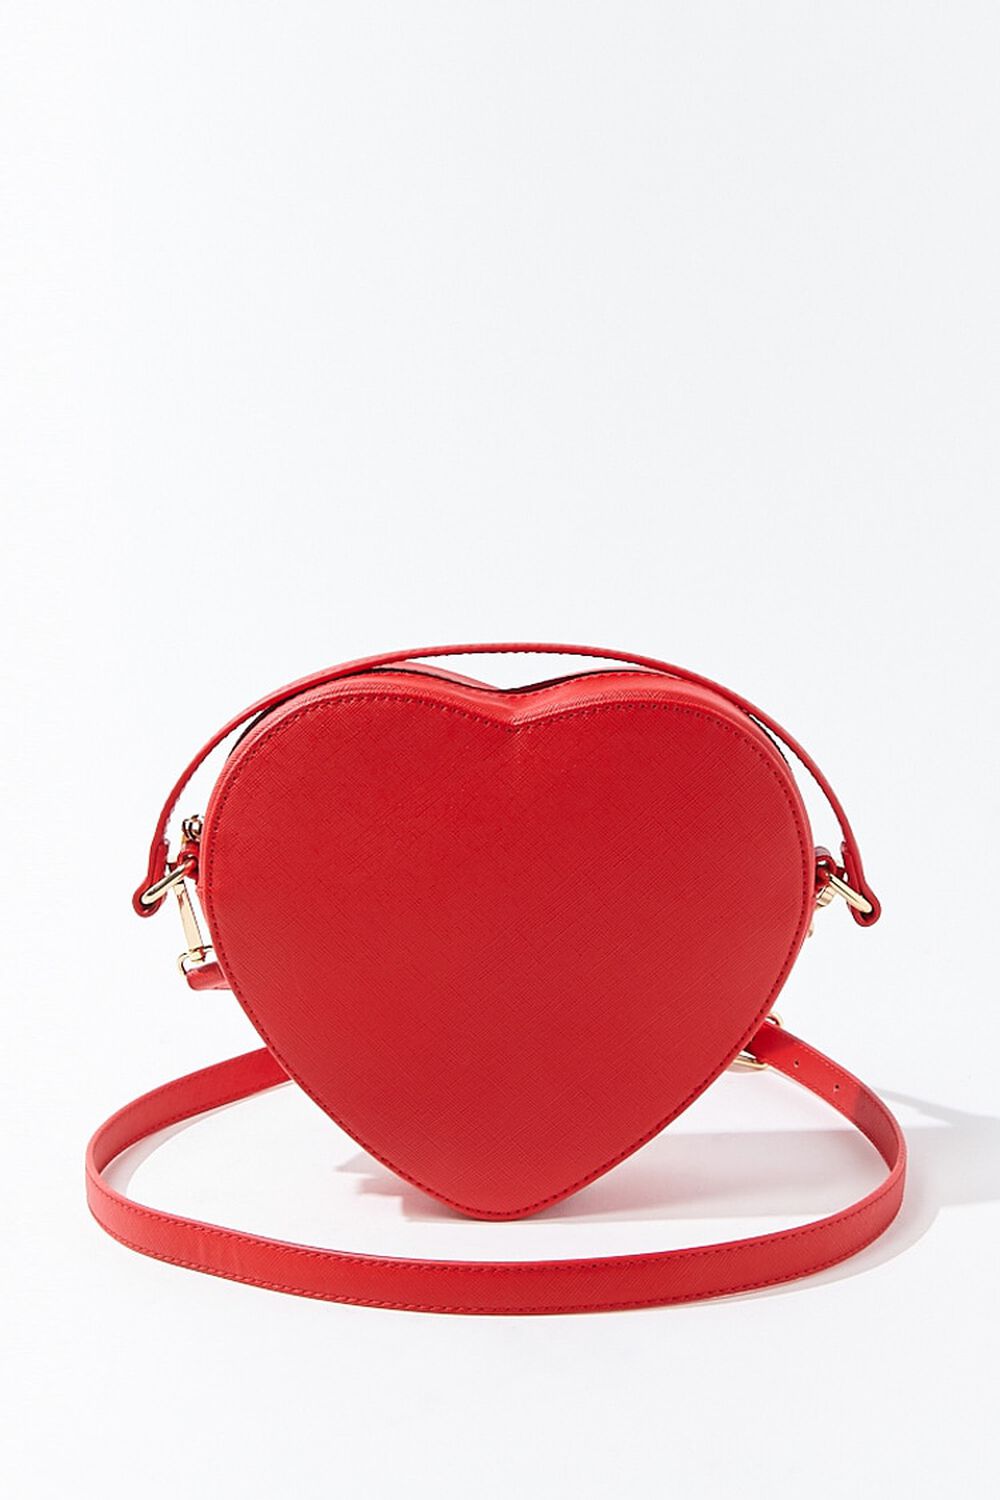 Forever 21, Bags, Heart Shaped Purse